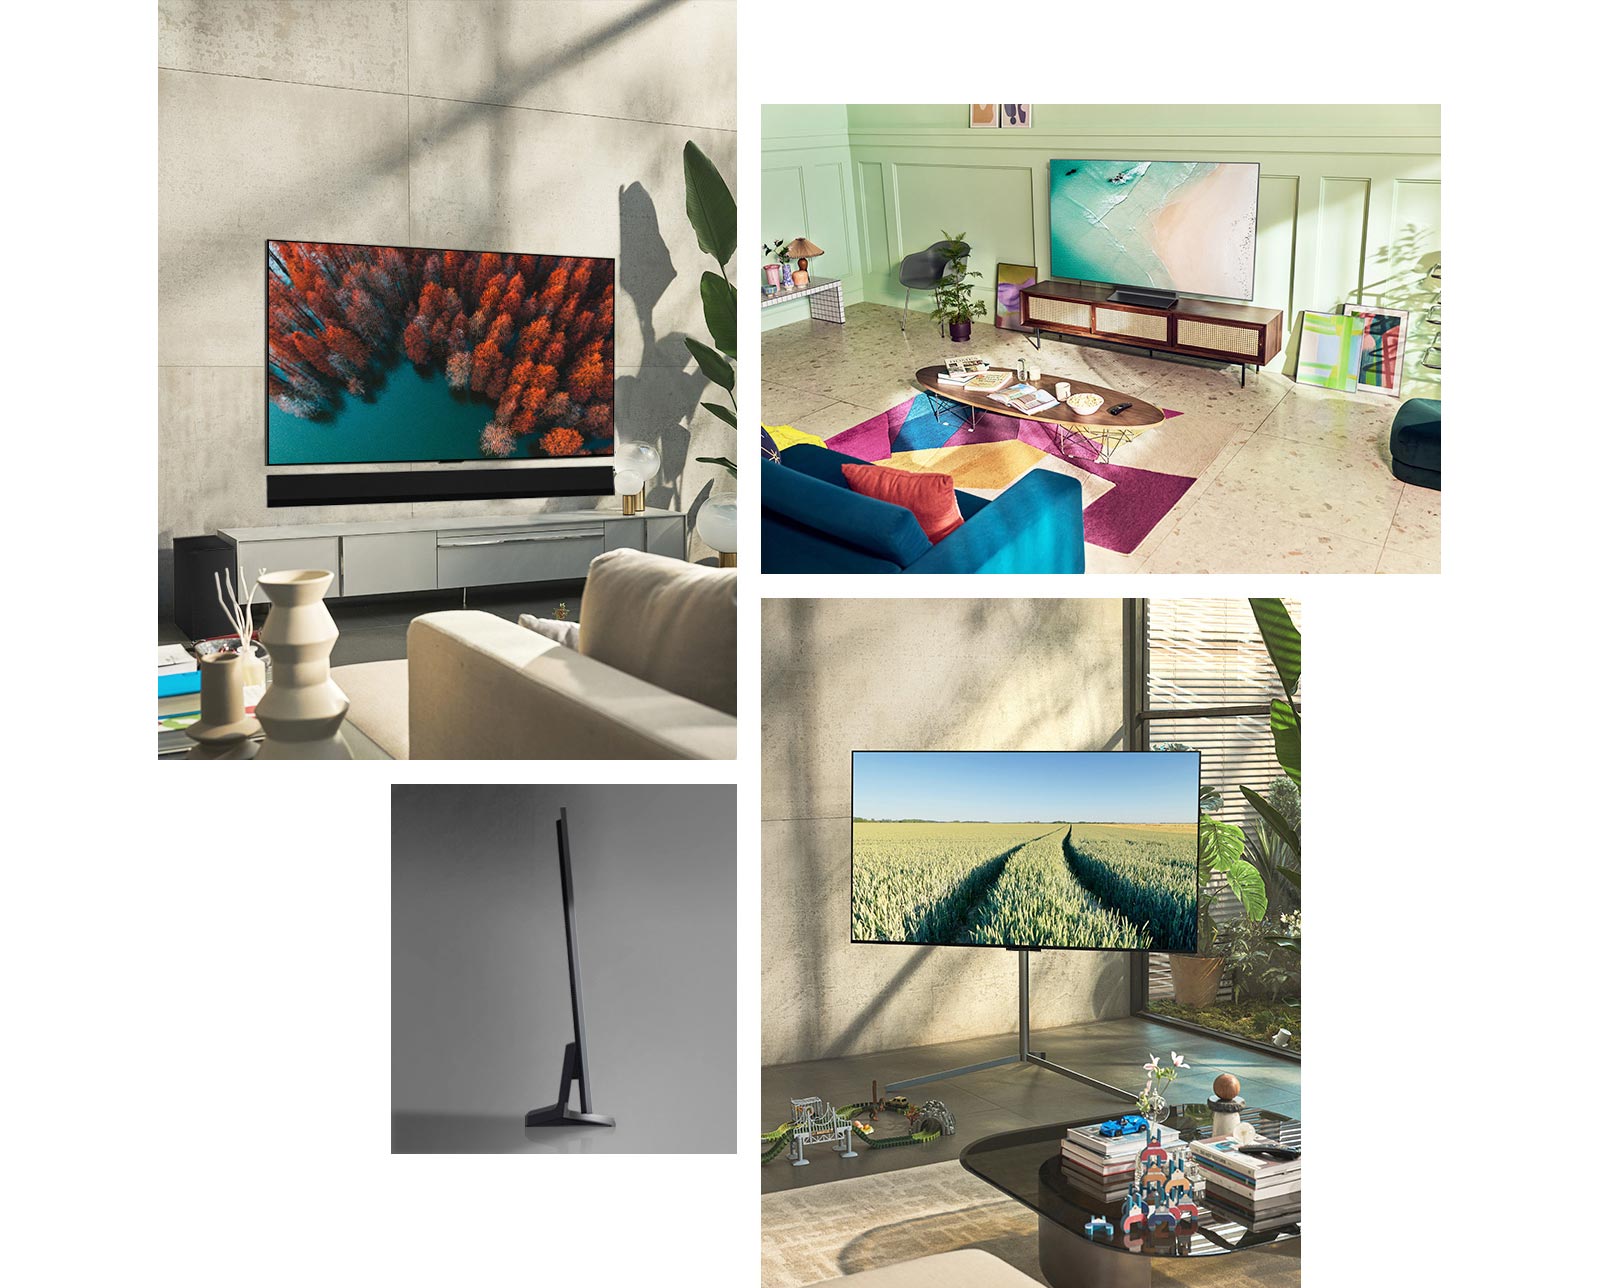 "An LG OLED G2 is hung on the wall in a neutral-colored living room with plants and rustic ornaments. An LG OLED G2 sits on a TV stand in a mint green room with colorful art and furnishings. An LG OLED G2 with Gallery Stand is in the corner of a room in a family home.  A side view of the ultra-slim edge of LG OLED G2."